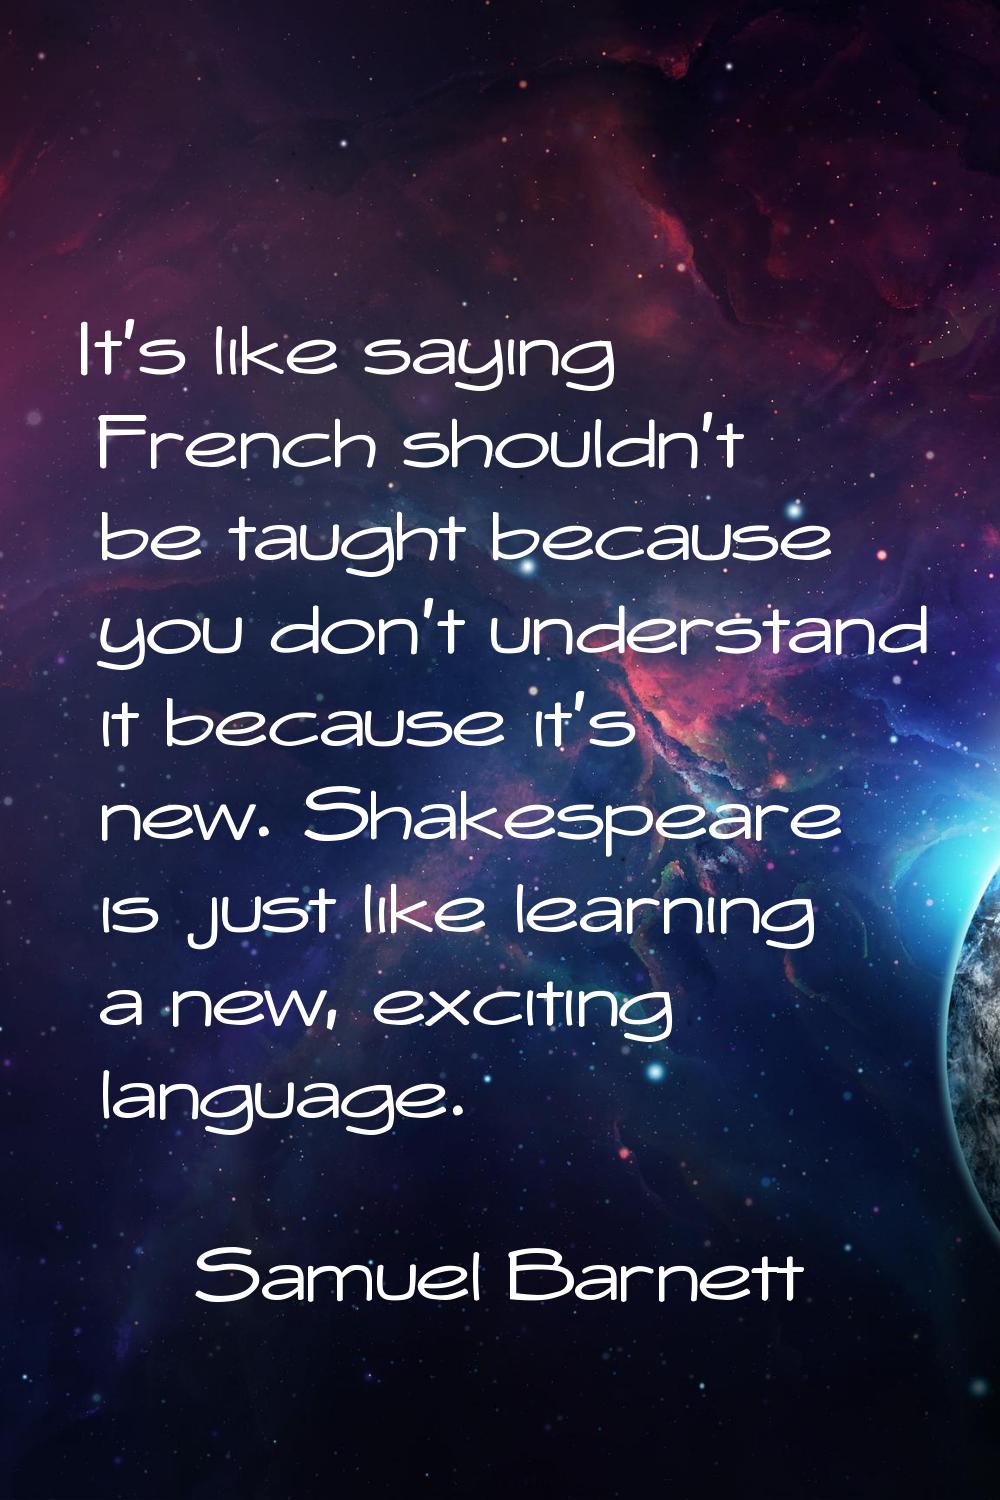 It's like saying French shouldn't be taught because you don't understand it because it's new. Shake